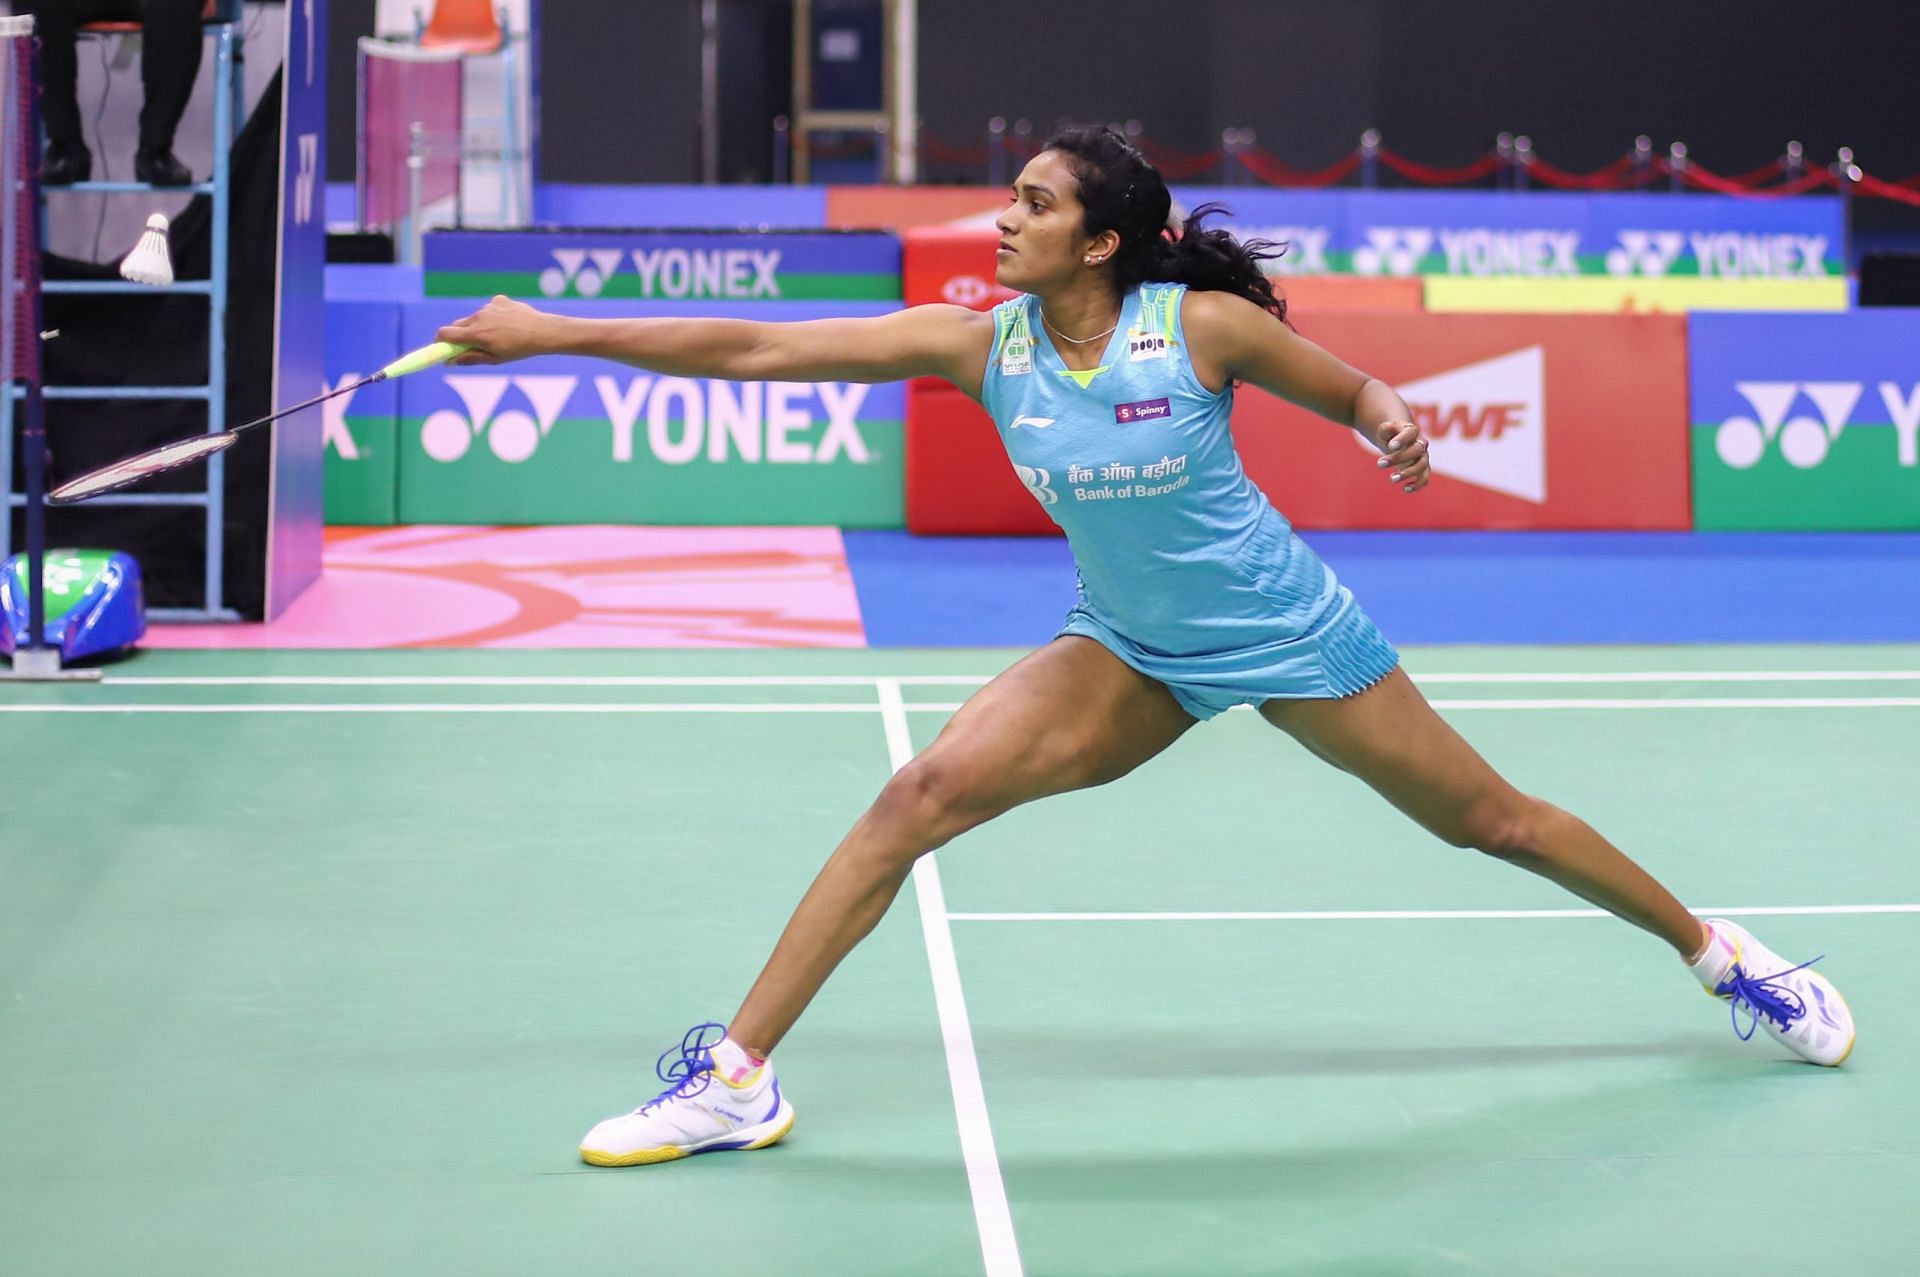 World No. 7 PV Sindhu and other top players of India will get to participate in the Badminton Asia Championships in Dubai from 2023 to 2027. (Pic credits: BAI)